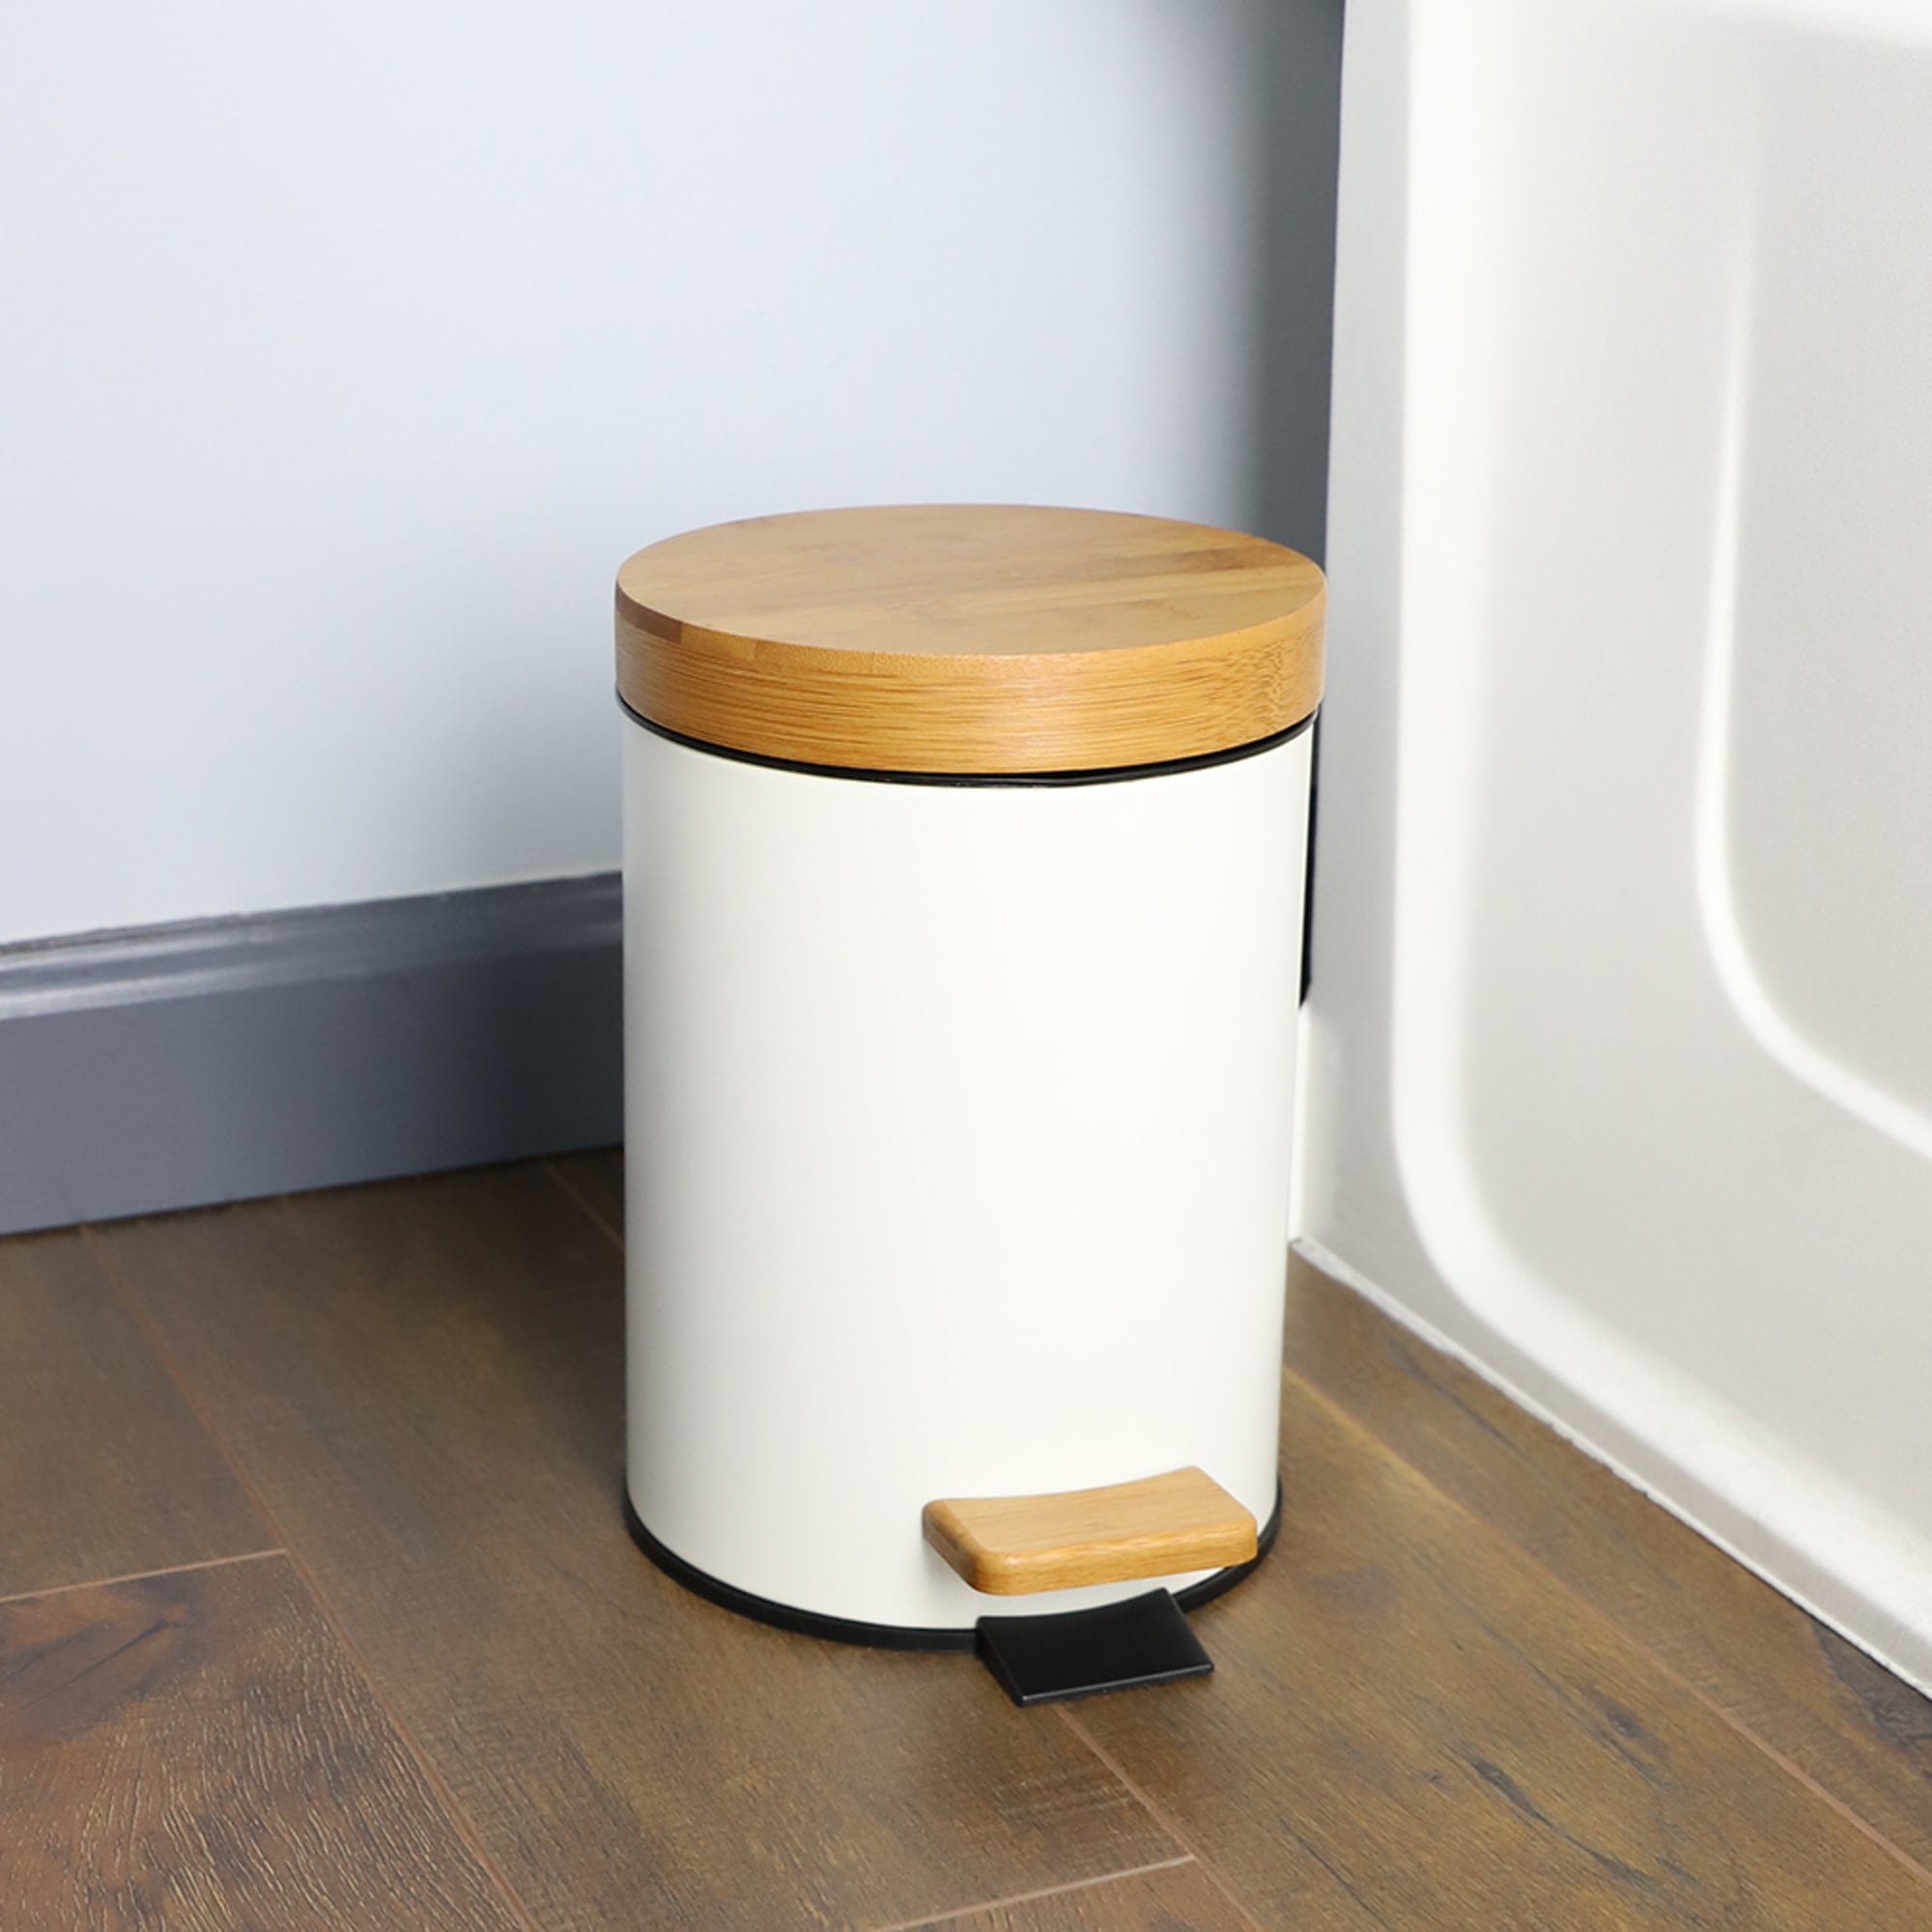 Home Basics 3 Lt Steel Step Waste Bin with Bamboo Top, White $8 EACH, CASE PACK OF 6